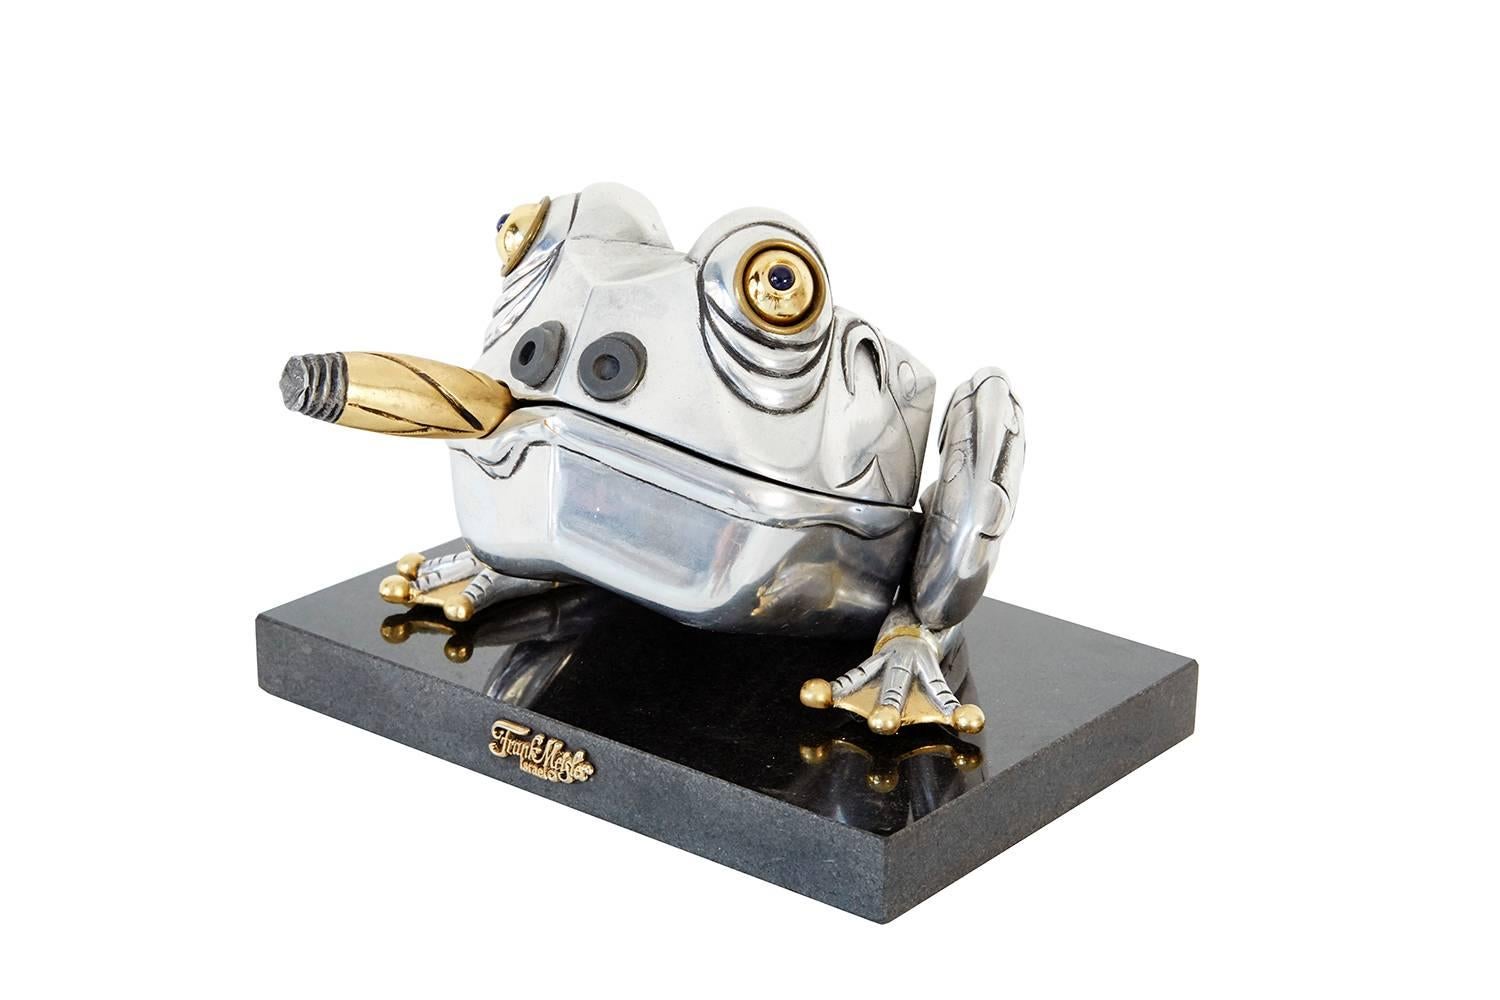 Frog box sculpture.

Designed by Frank Meisler.

Silver and gold plated metal box on black marble base, interior gold and silver fly.

Dimension: 6